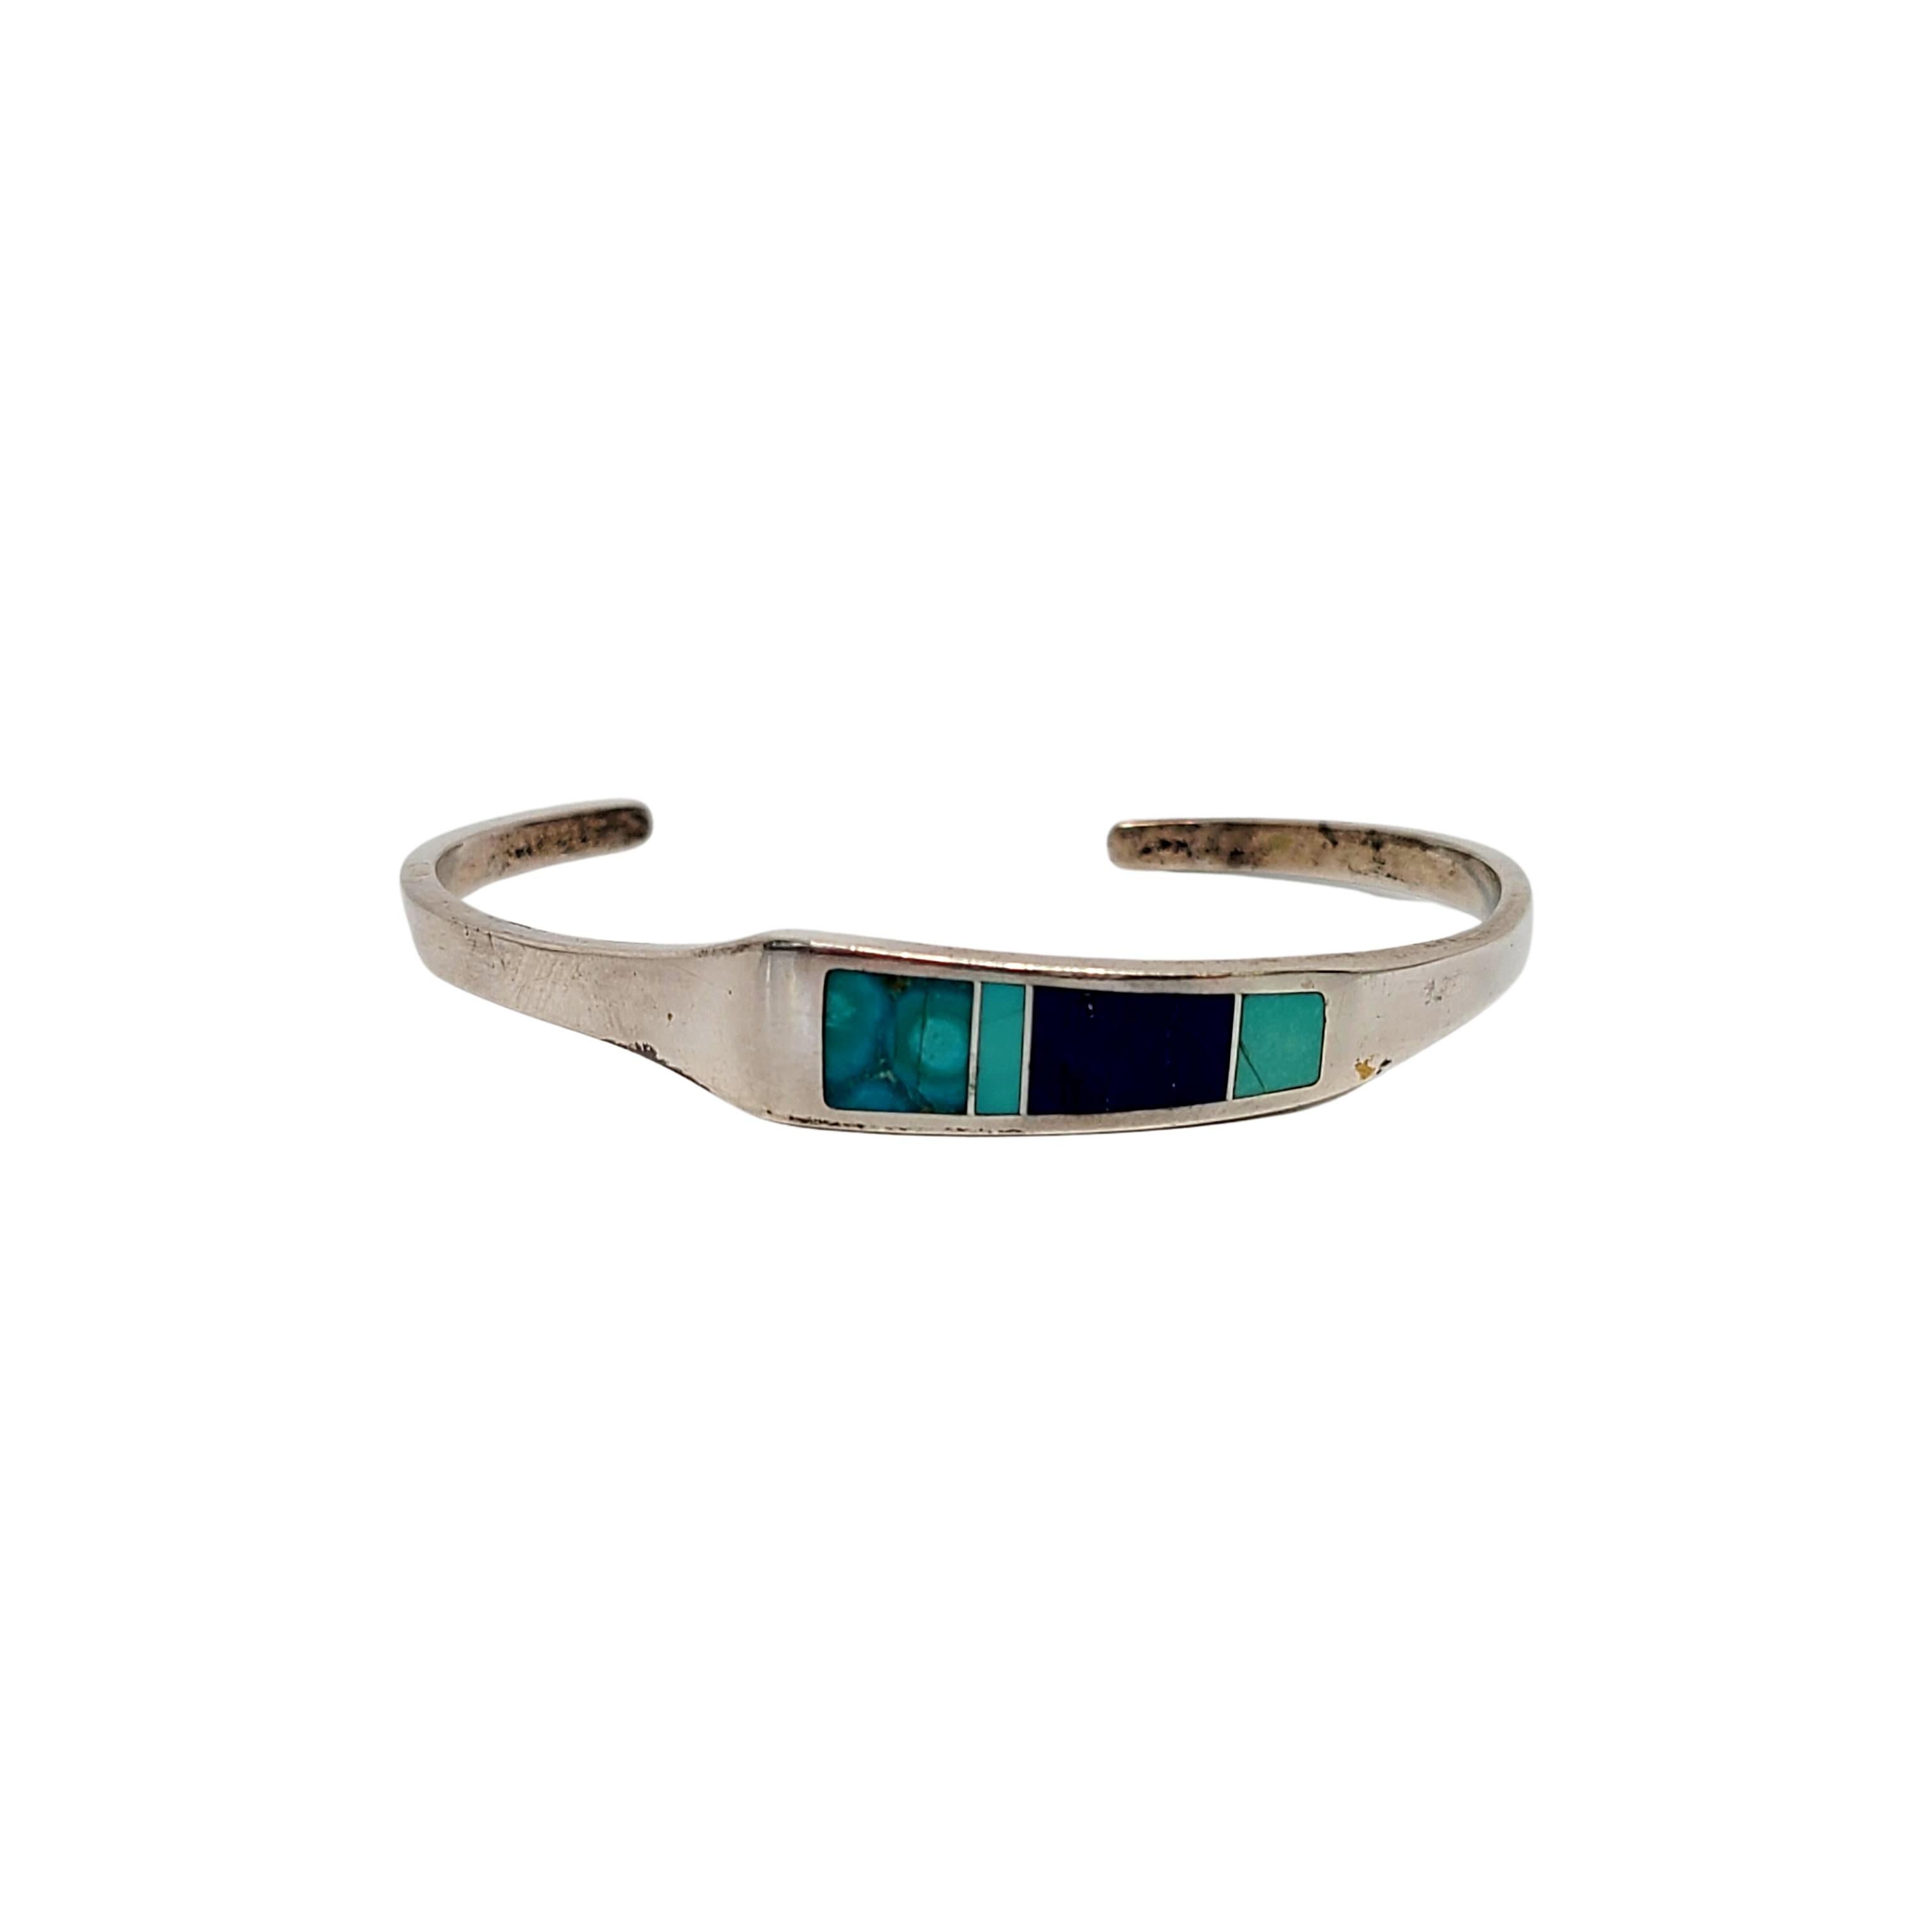 Sterling silver and multi-stone inlay cuff bracelet by Native American Navajo artisans, Ray Tracey and Knifewing Seguara.

Beautiful channel inlay mosaic of what appears to be turquoise and lapis lazuli stones. A collaboration of well known